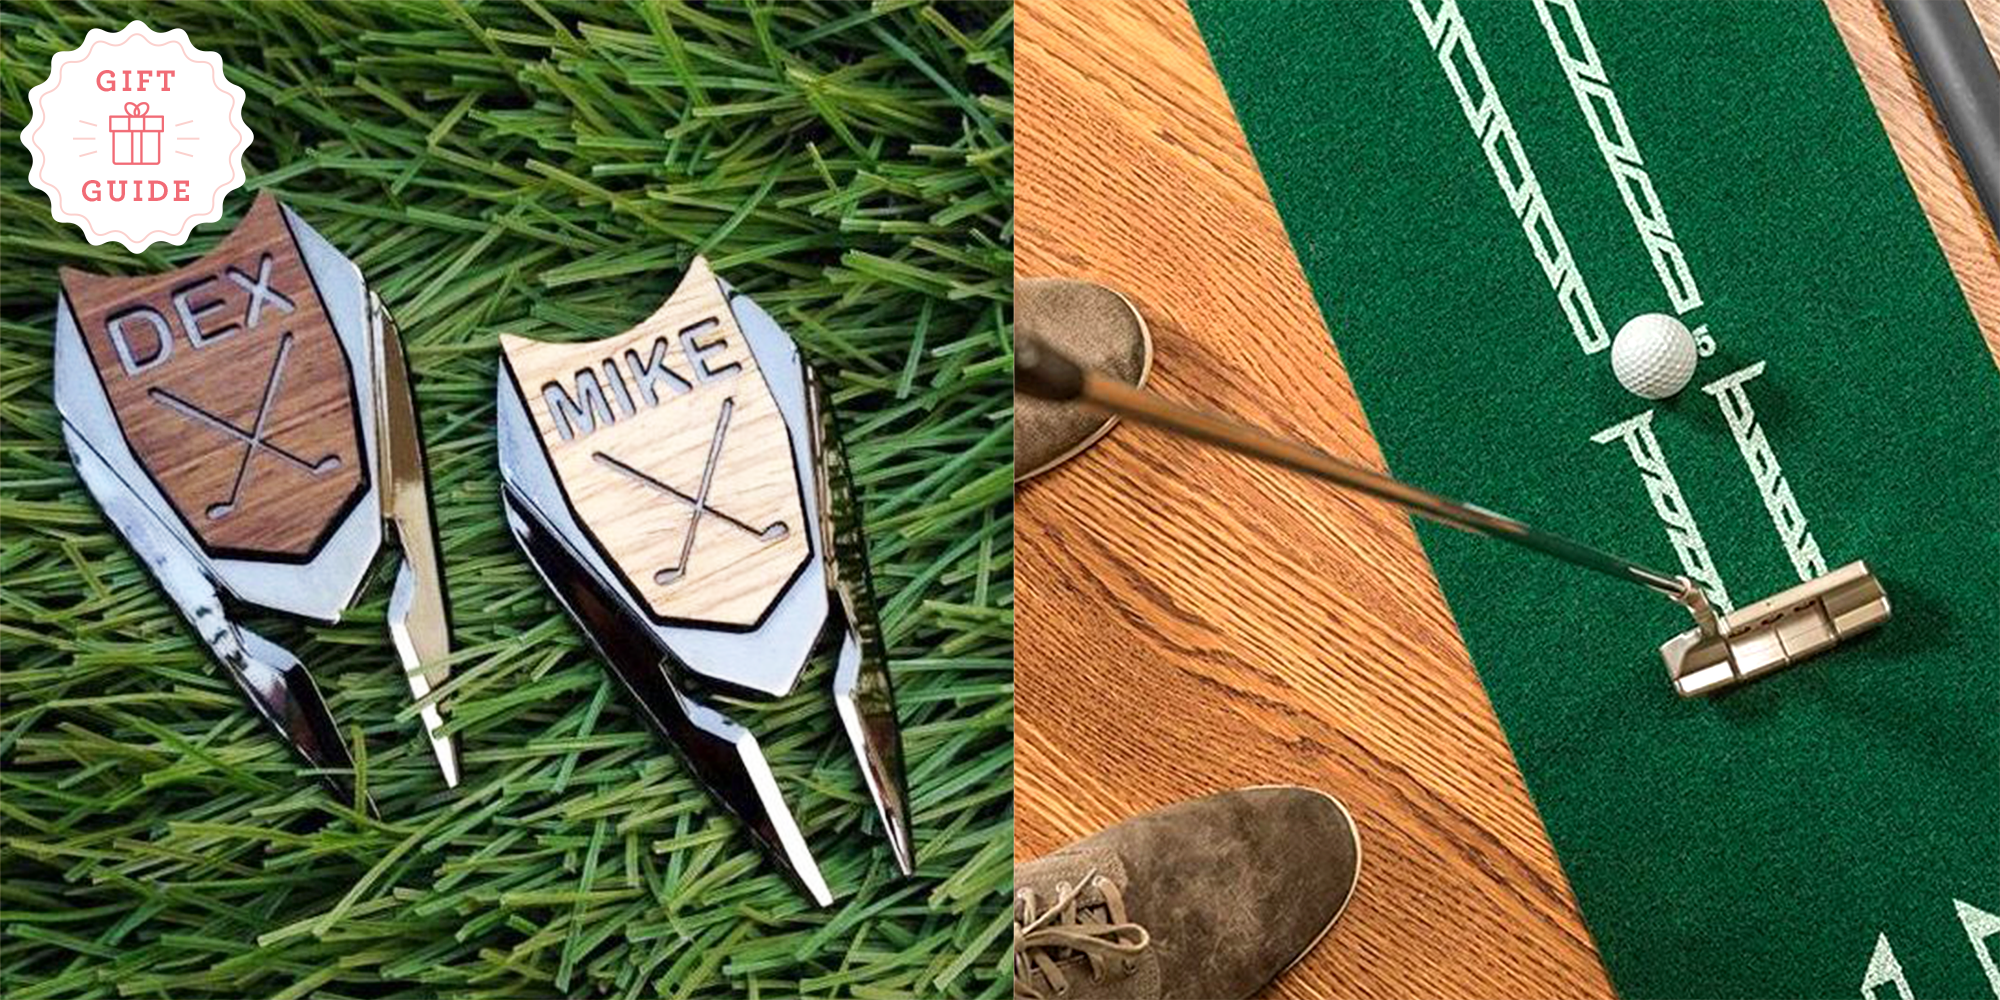 30 Best Golf Gifts for Men - Gifts to 